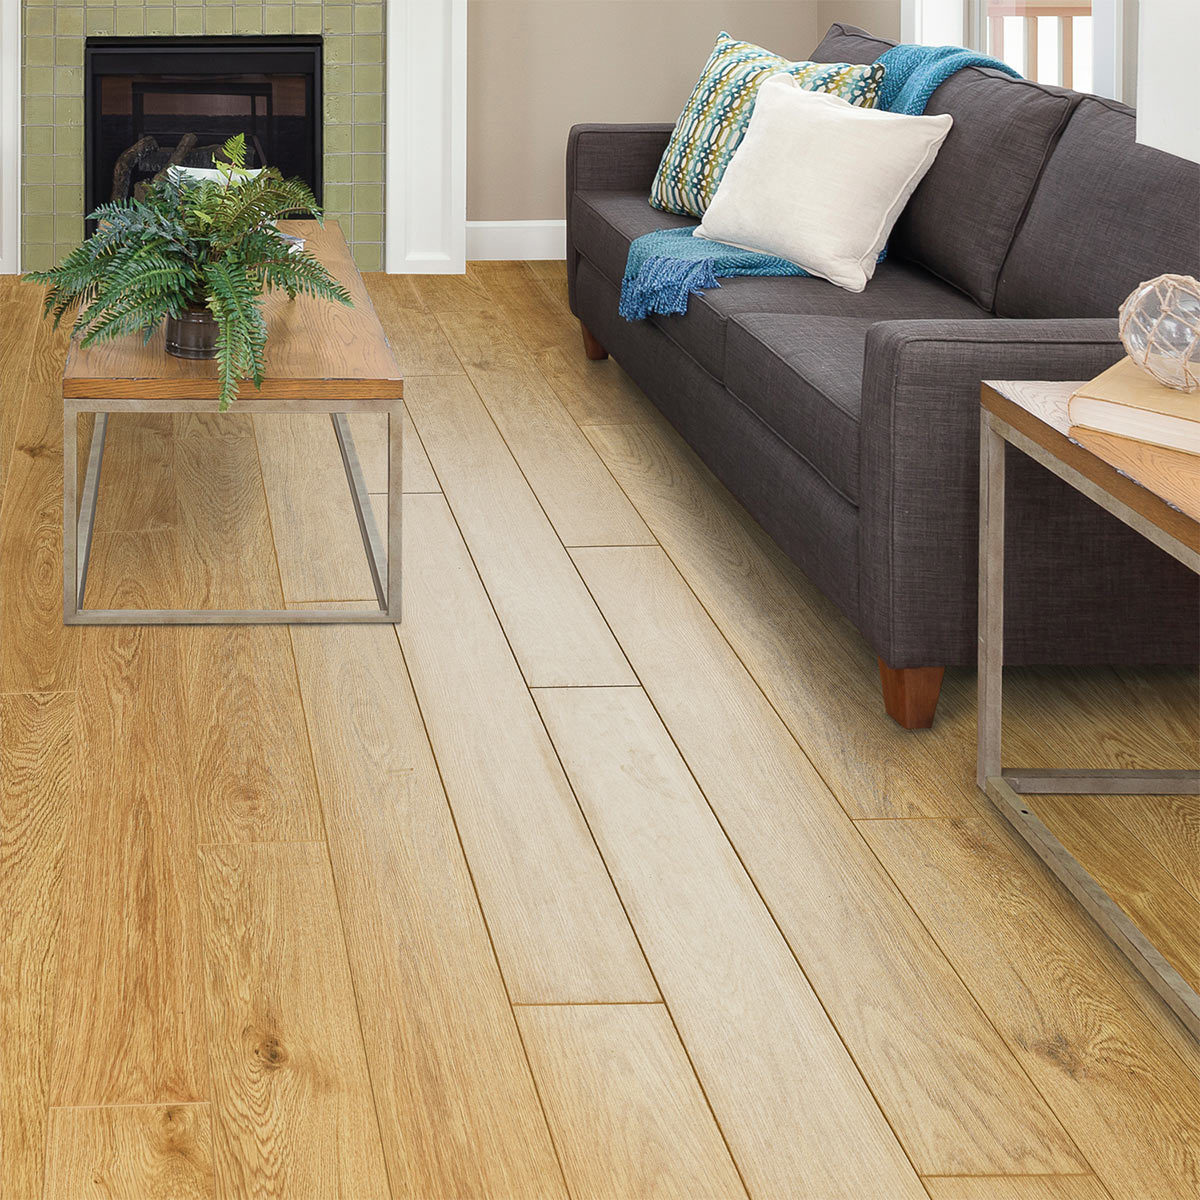 Golden Select Nottingham Oak Laminate, How Much Is The Laminate Flooring At Costco